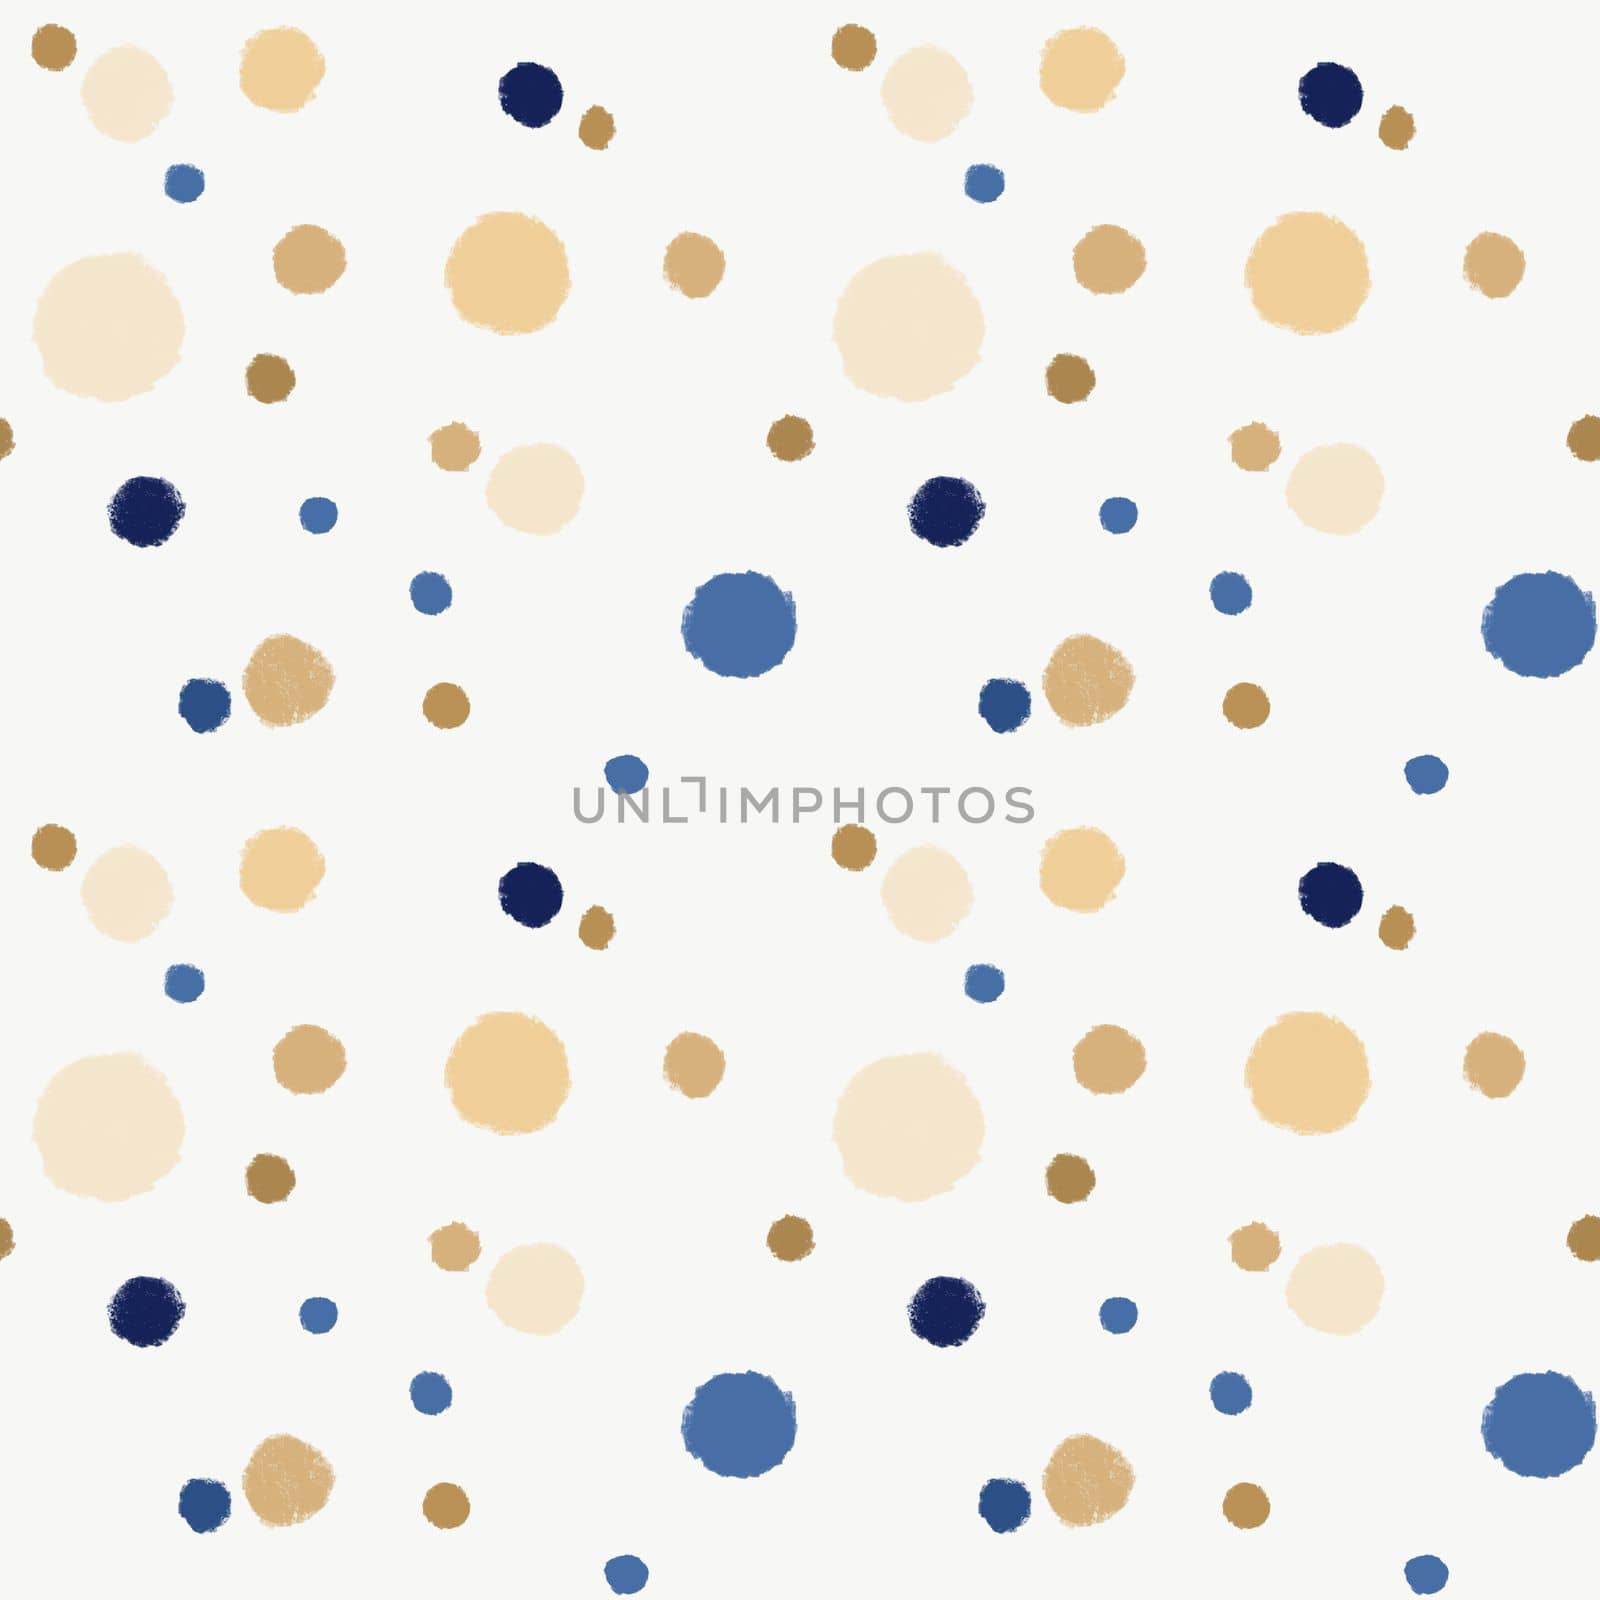 Seamless festive background with gold, blue and beige circles.